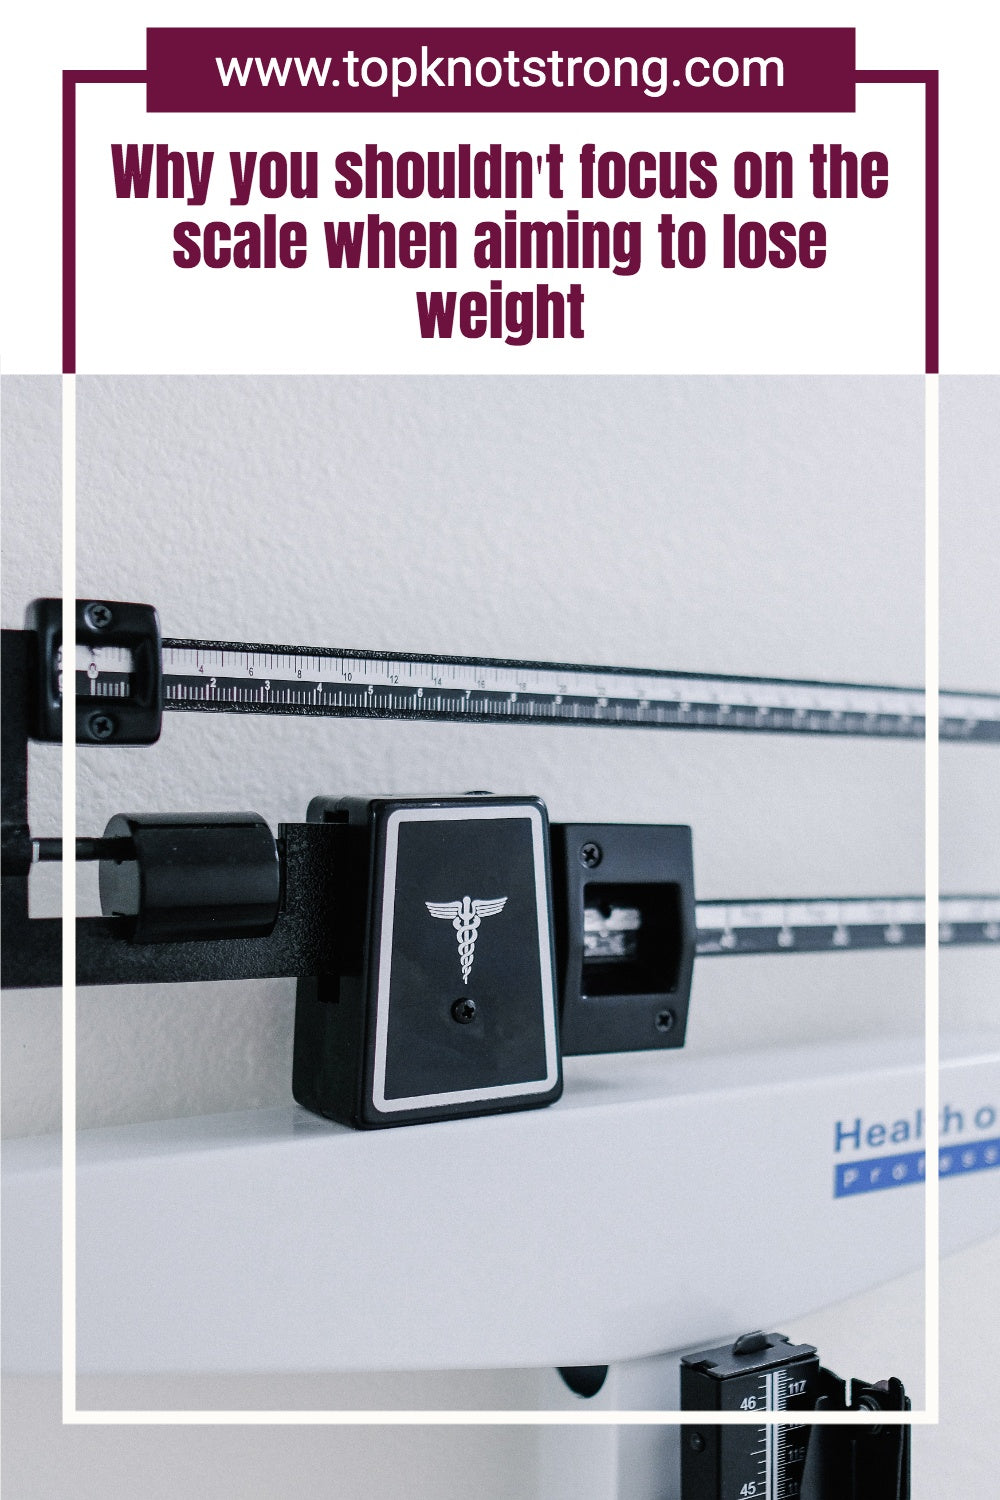 Why you shouldn't focus on the scale when aiming to lose weight